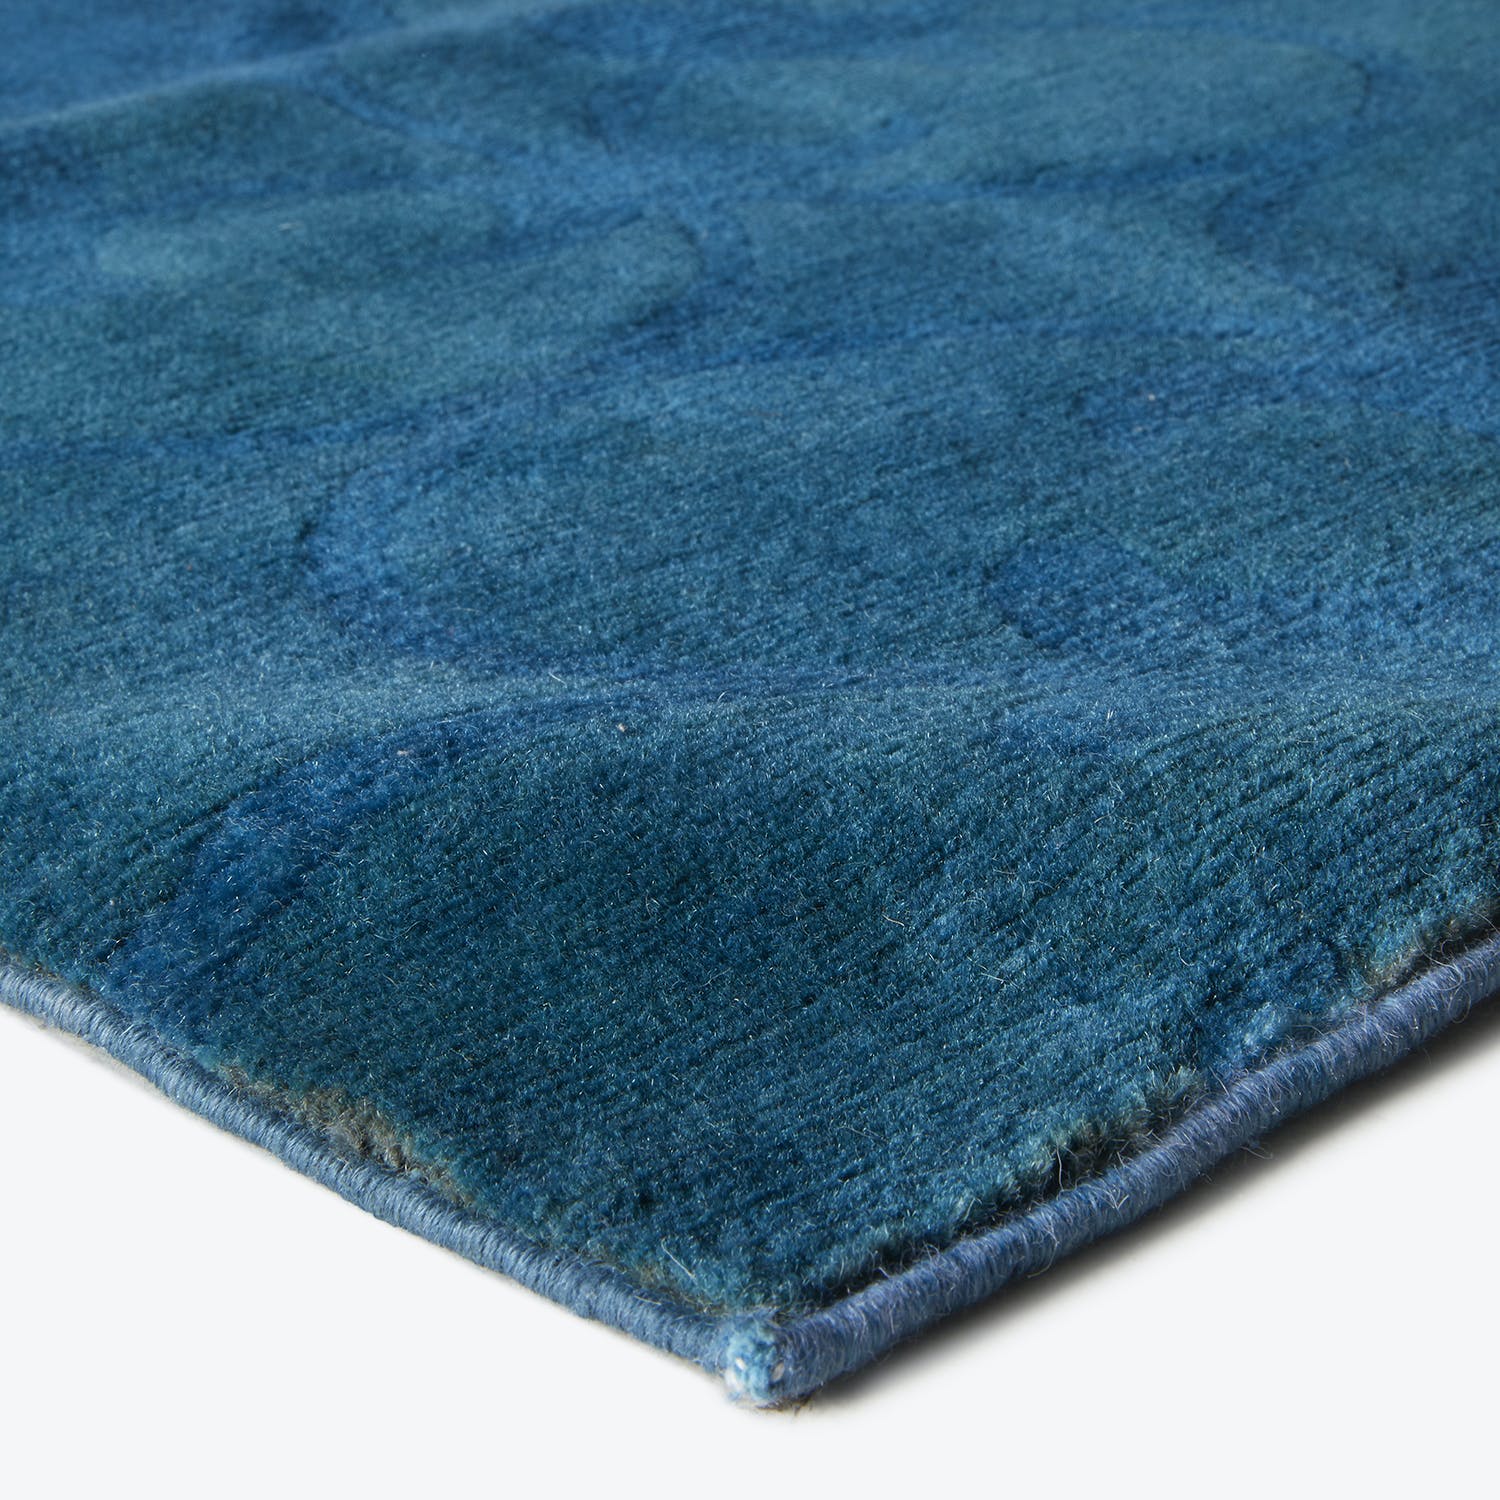 Close-up of a textured blue rug with folded hem edges.